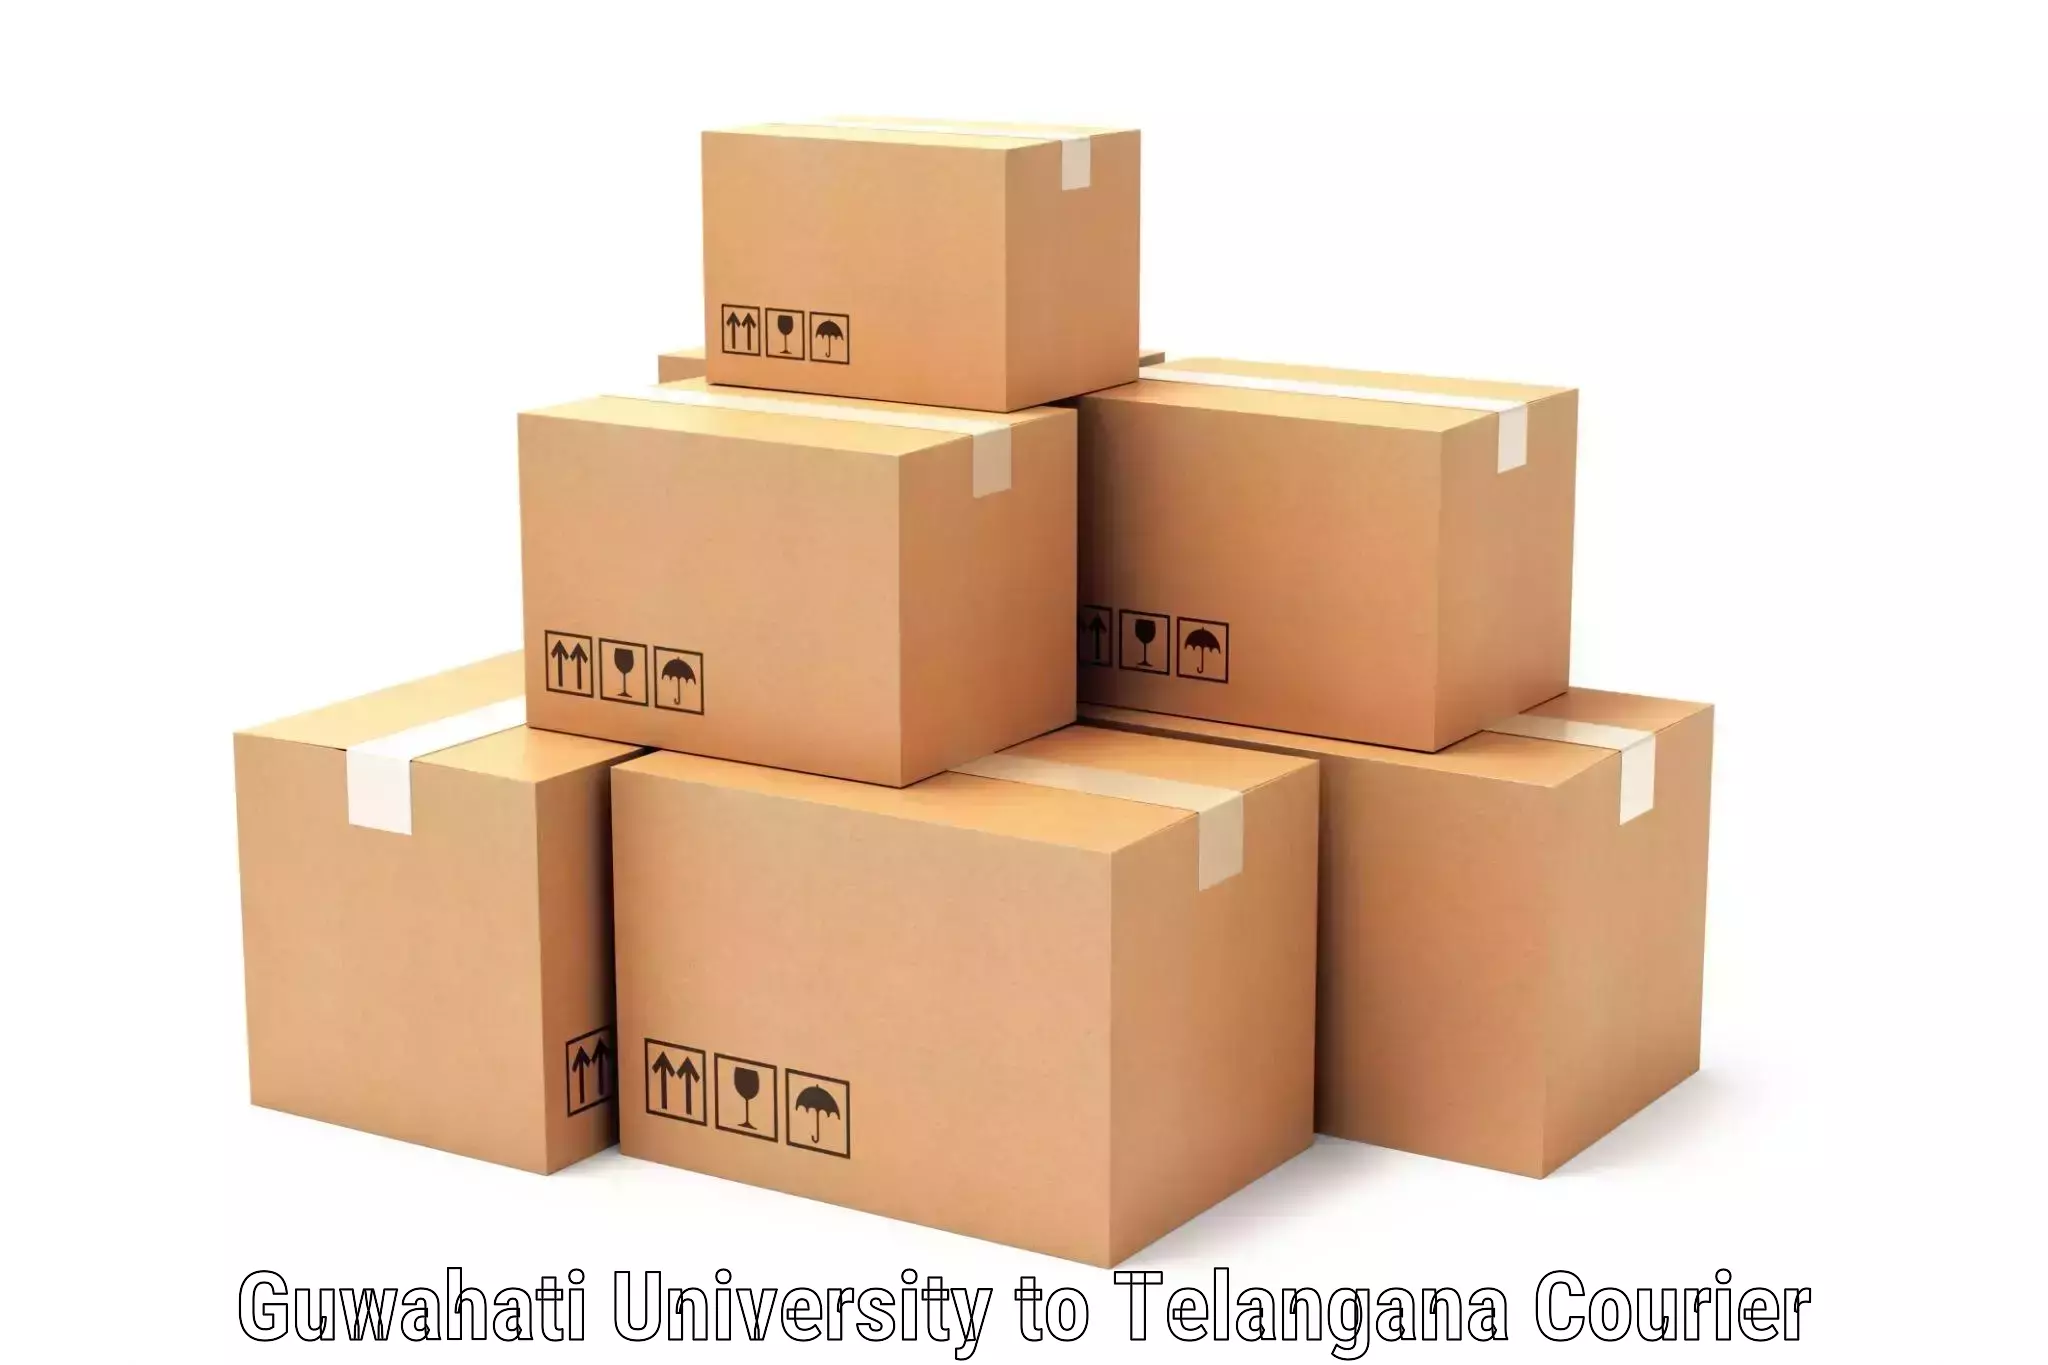 Professional parcel services Guwahati University to Sangareddy